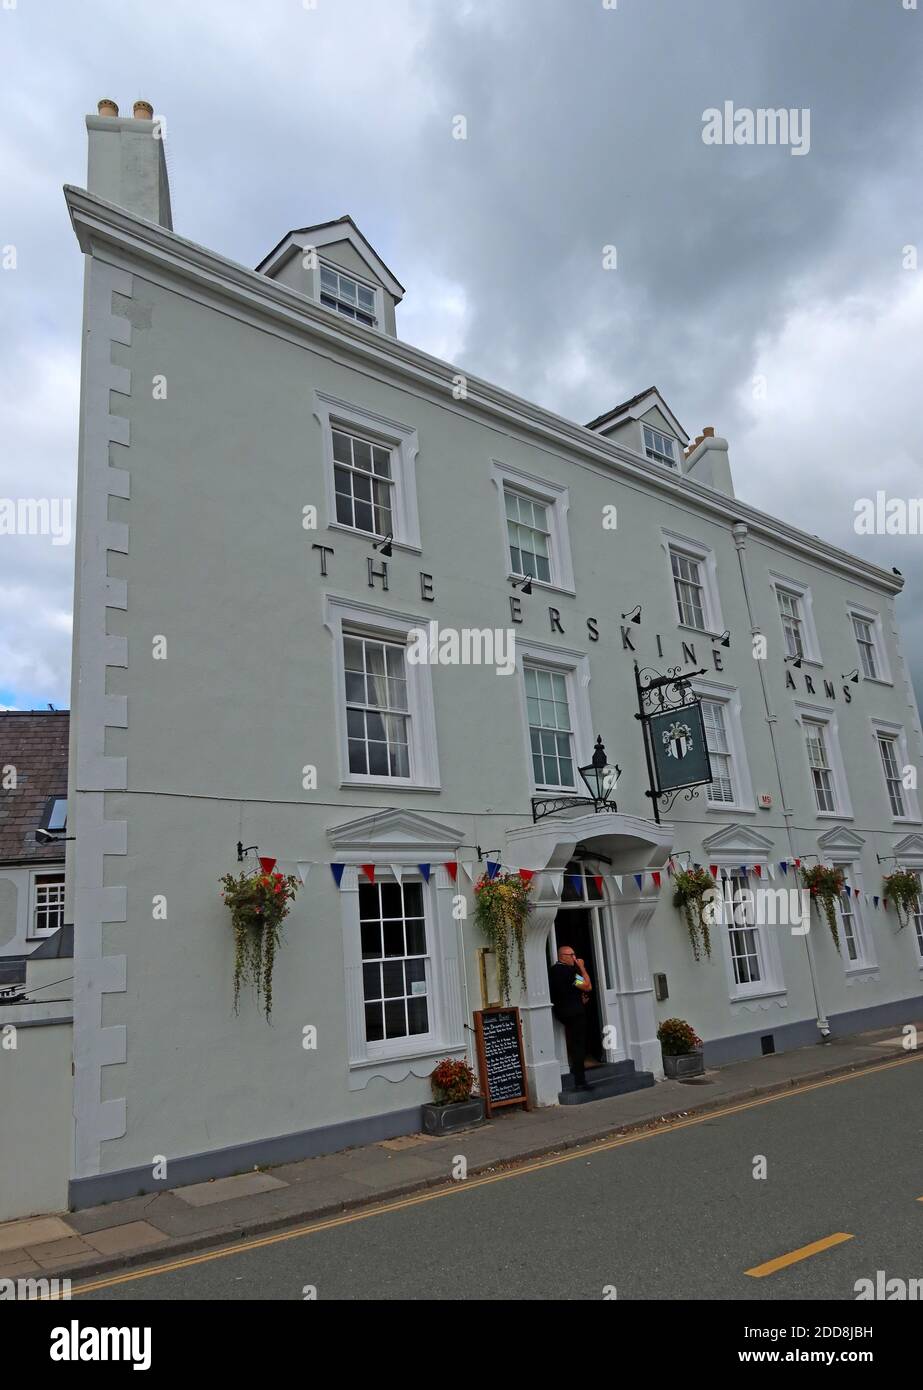 The Erskine Arms Hotel, Rose Hill Street, Conwy, pays de Galles, Royaume-Uni, LL32 8LD Banque D'Images